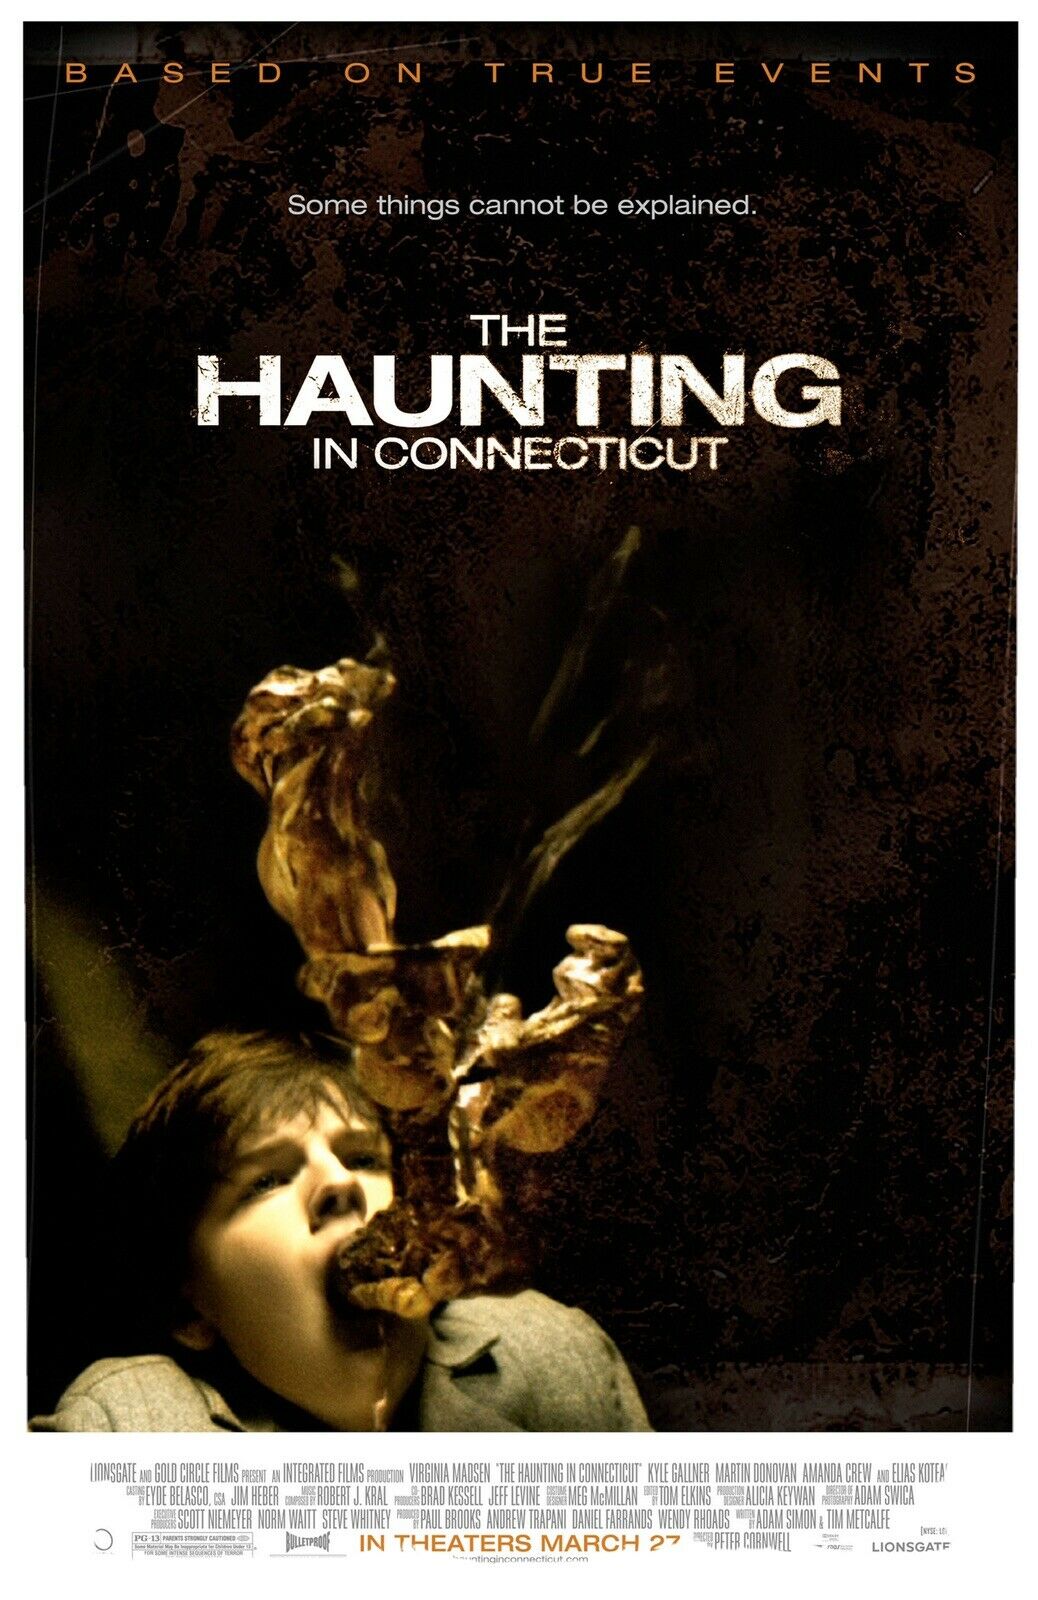 HAUNTING IN CONNECTICUT, THE